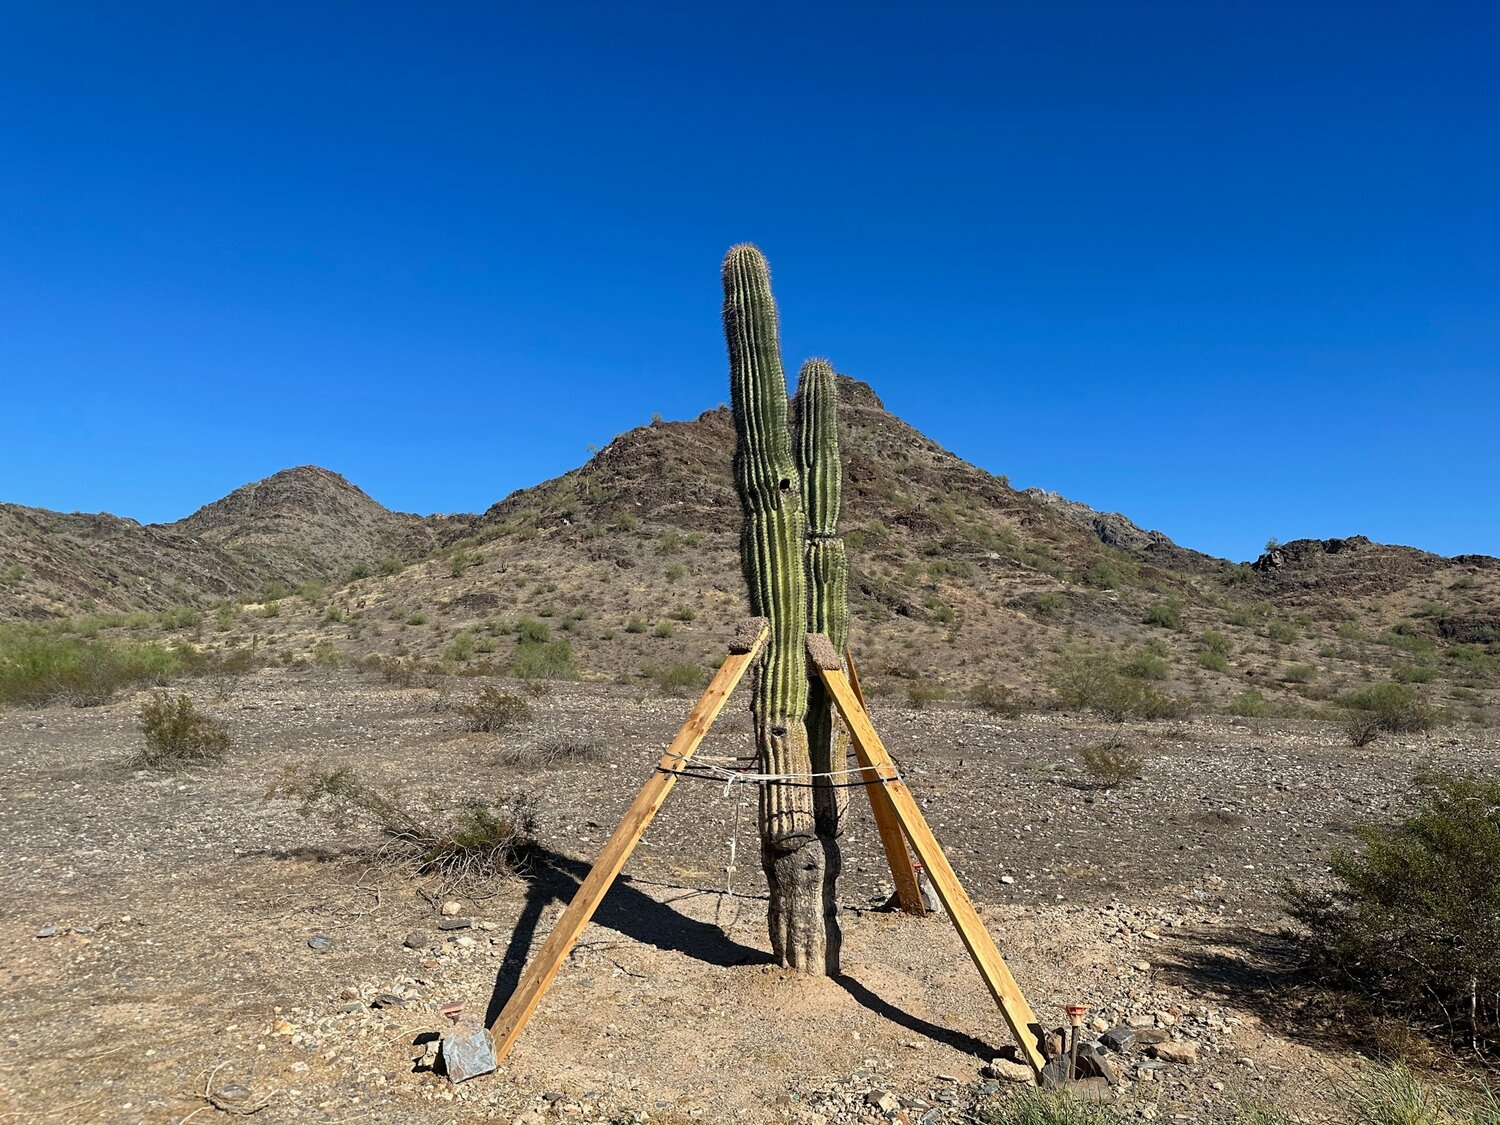 A saguaro newly replanted at the Dreamy Draw Recreation Area is supported after its recent transplantation from the 24th Street water treatment facility.